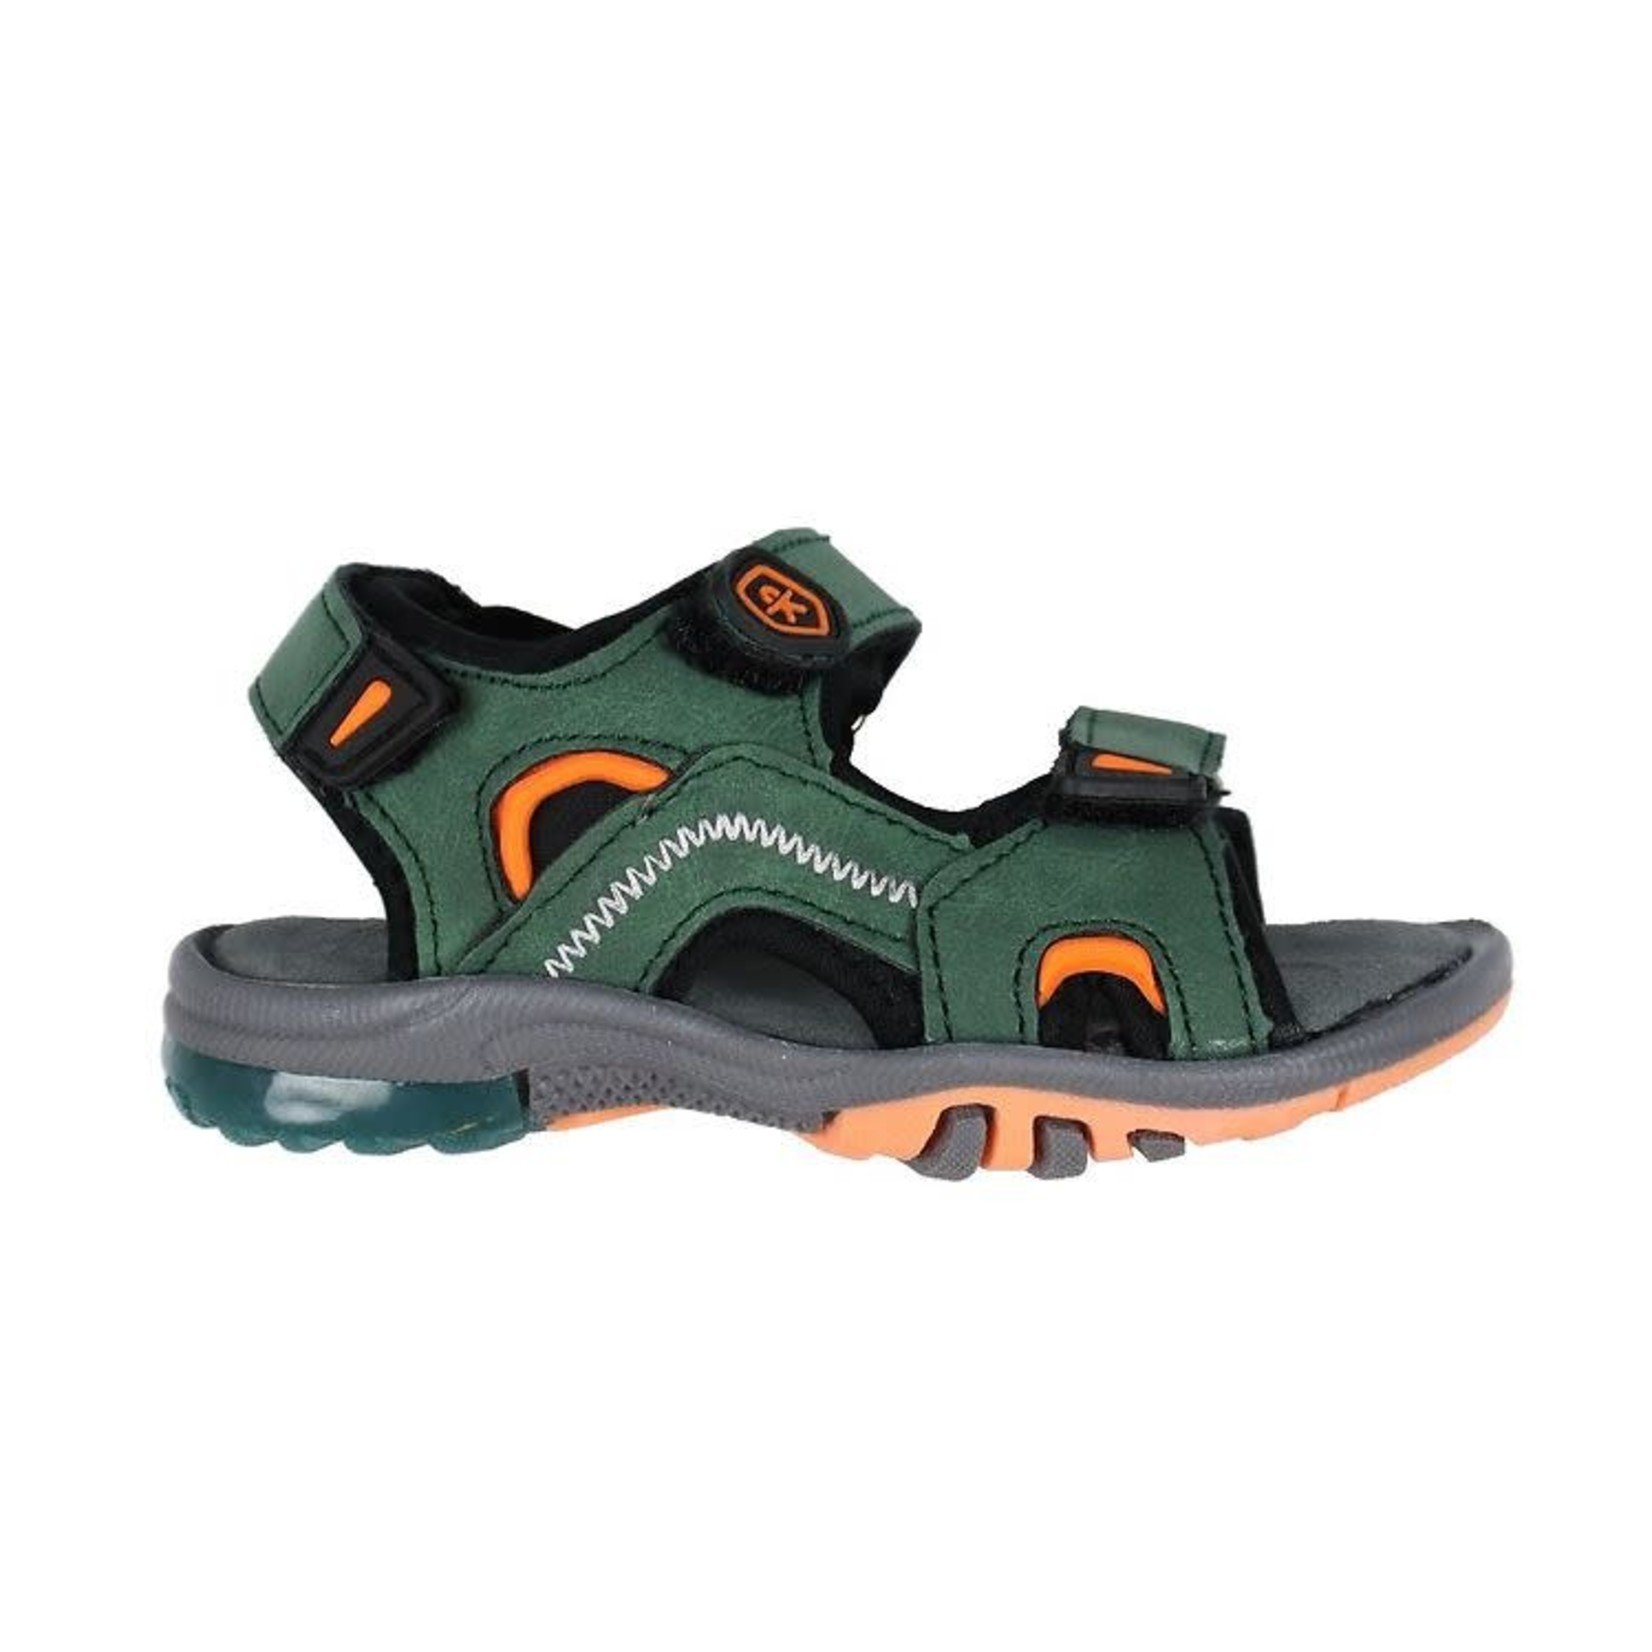 Color Kids COLOR KIDS - Open toe sport sandals with light up sole - Green and orange 'Cilantro'